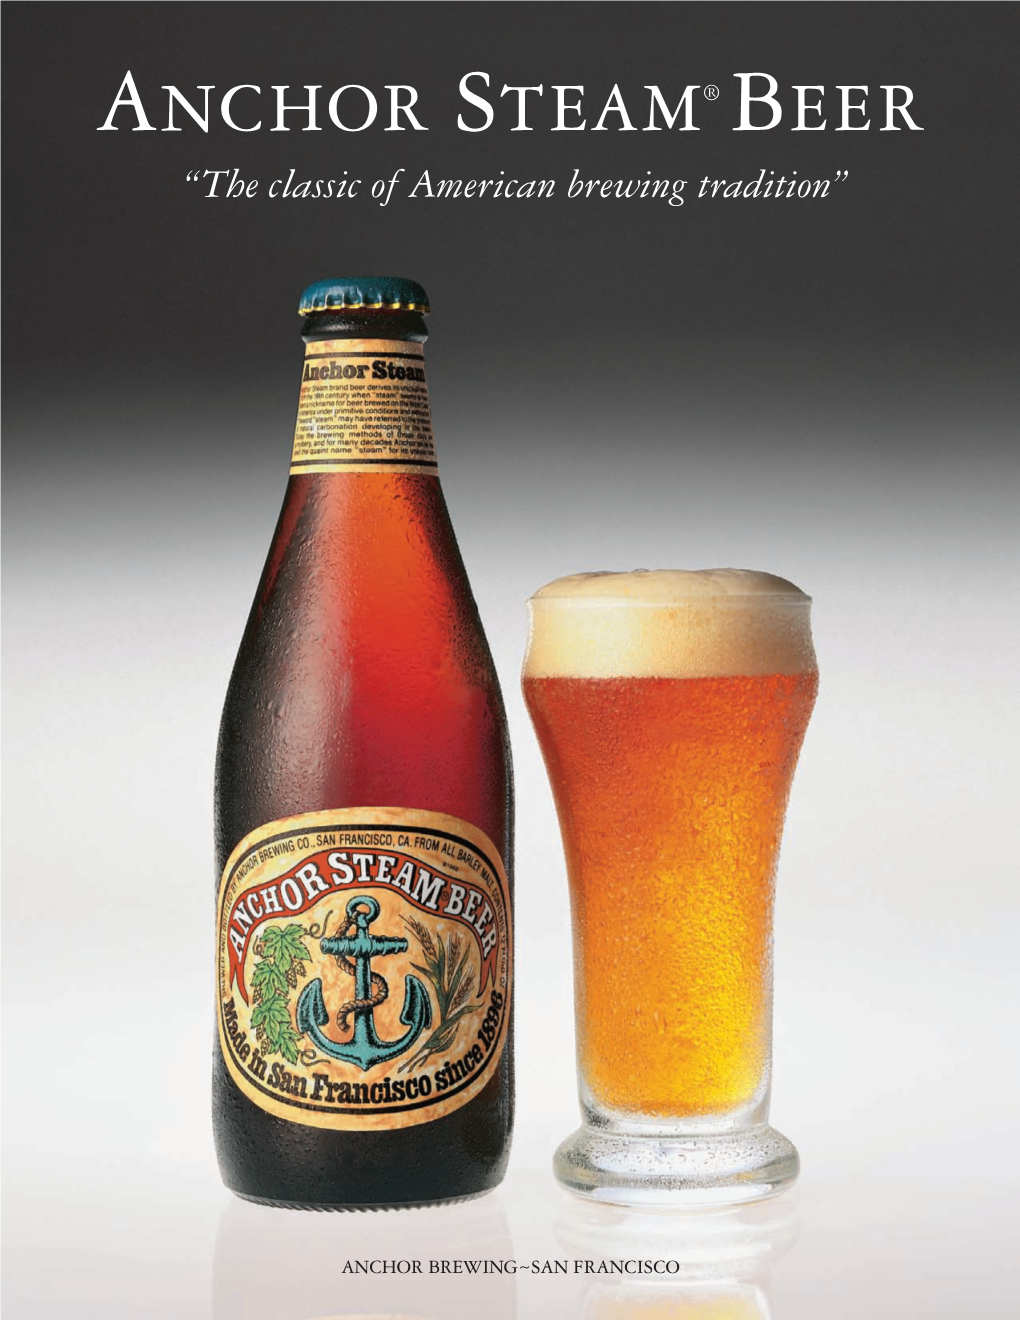 ANCHOR STEAM® BEER “The Classic of American Brewing Tradition”